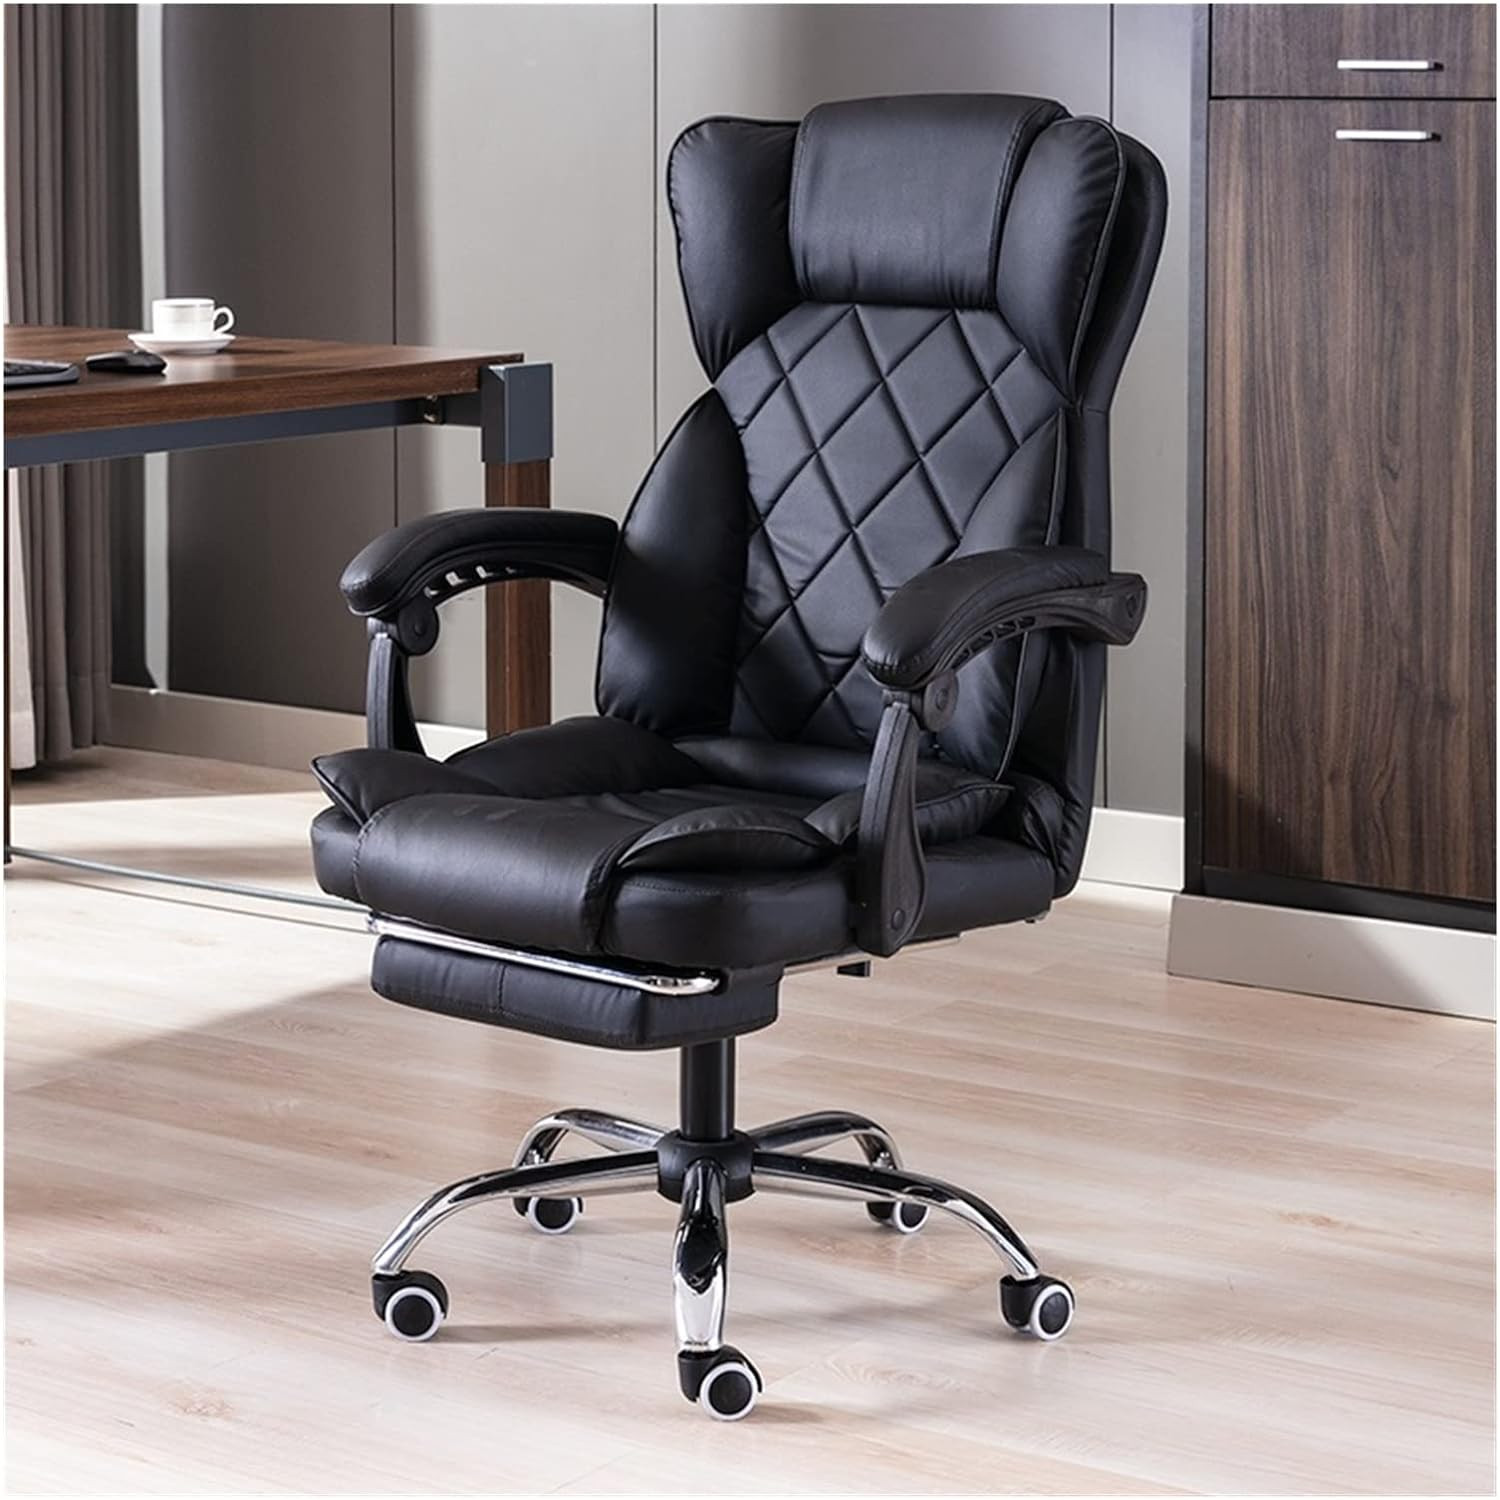 Sulsha Furniture Ergonomic Computer Desk Chair For Office And Gaming Chair With Headrest, Back Comfort And Lumbar Support - Black